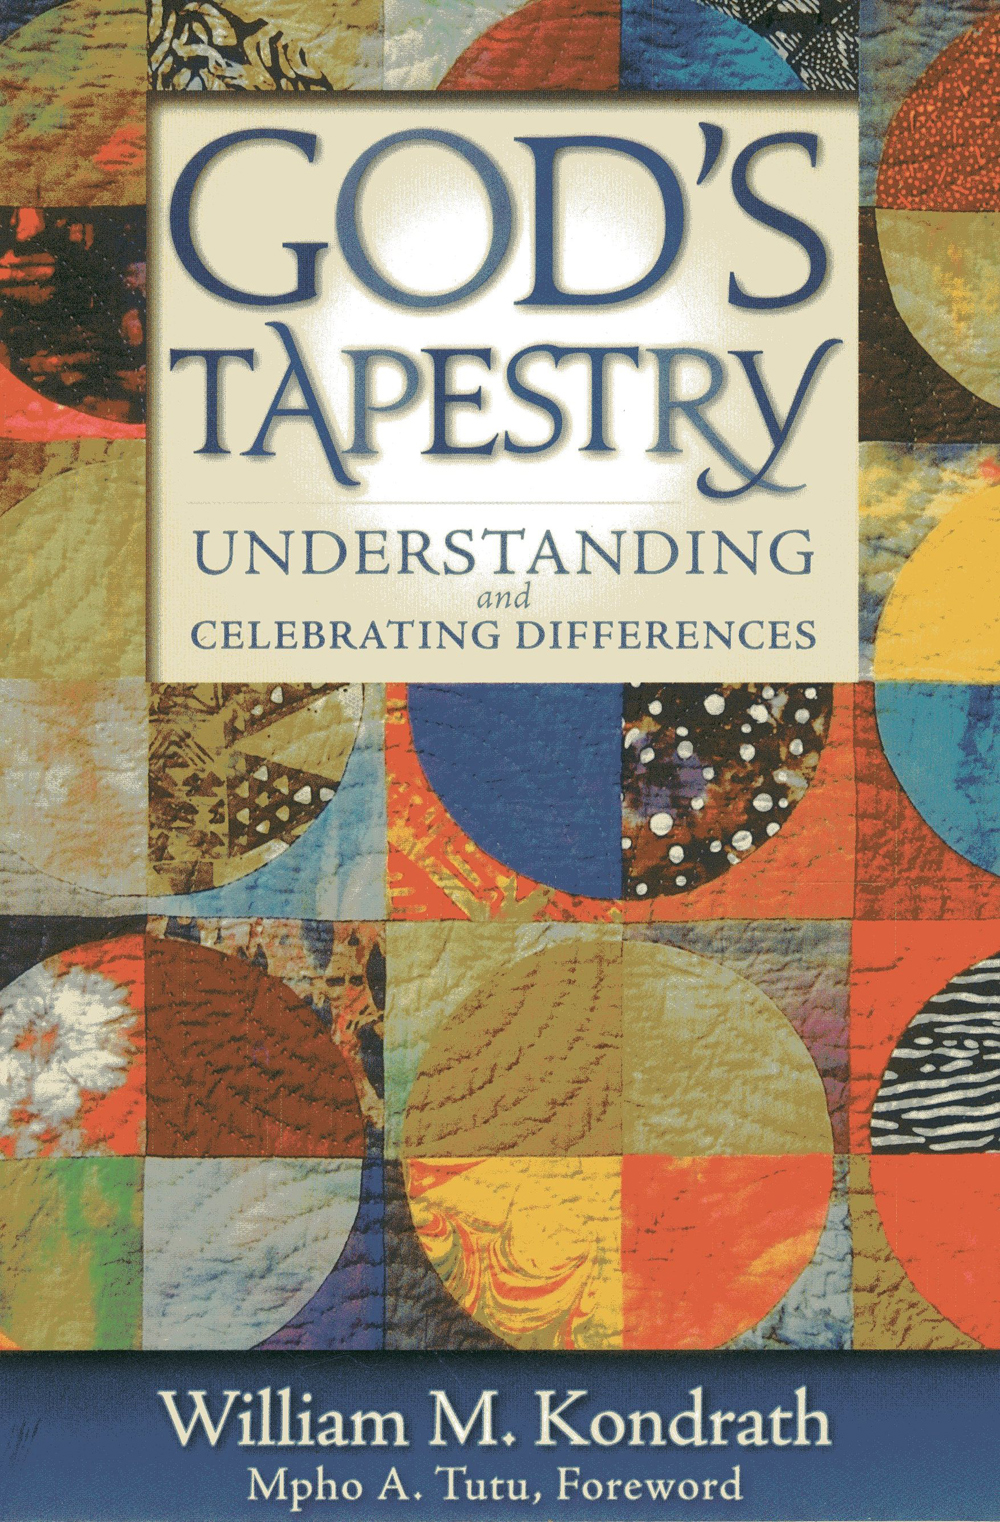 God's Tapestry: Understanding and Celebrating Differences